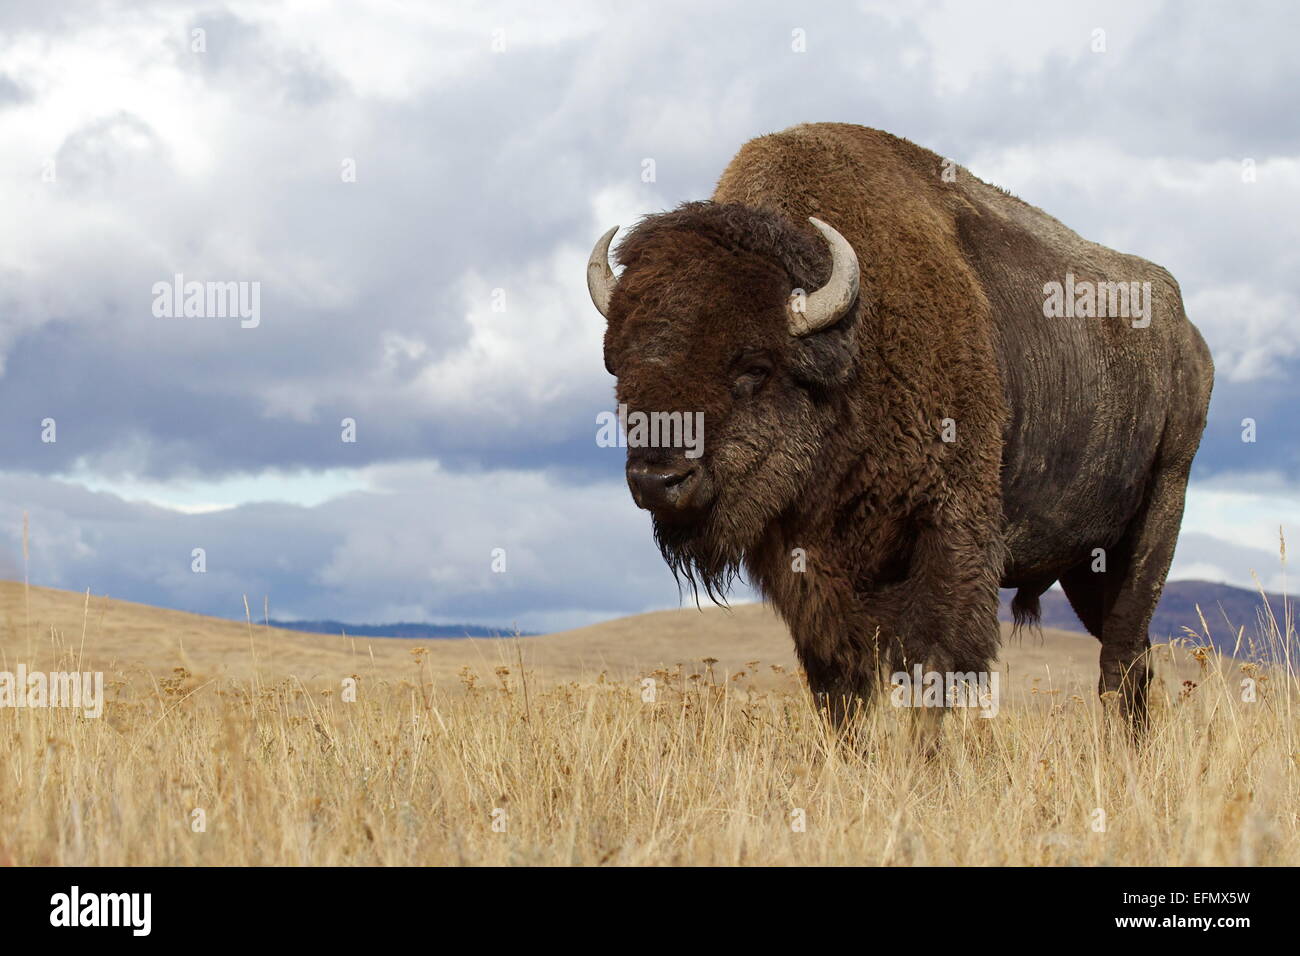 American Bison, 'buffalo'  Environmental Portrait in prairie grasslands of an Indian reservation in western Montana, USA Stock Photo